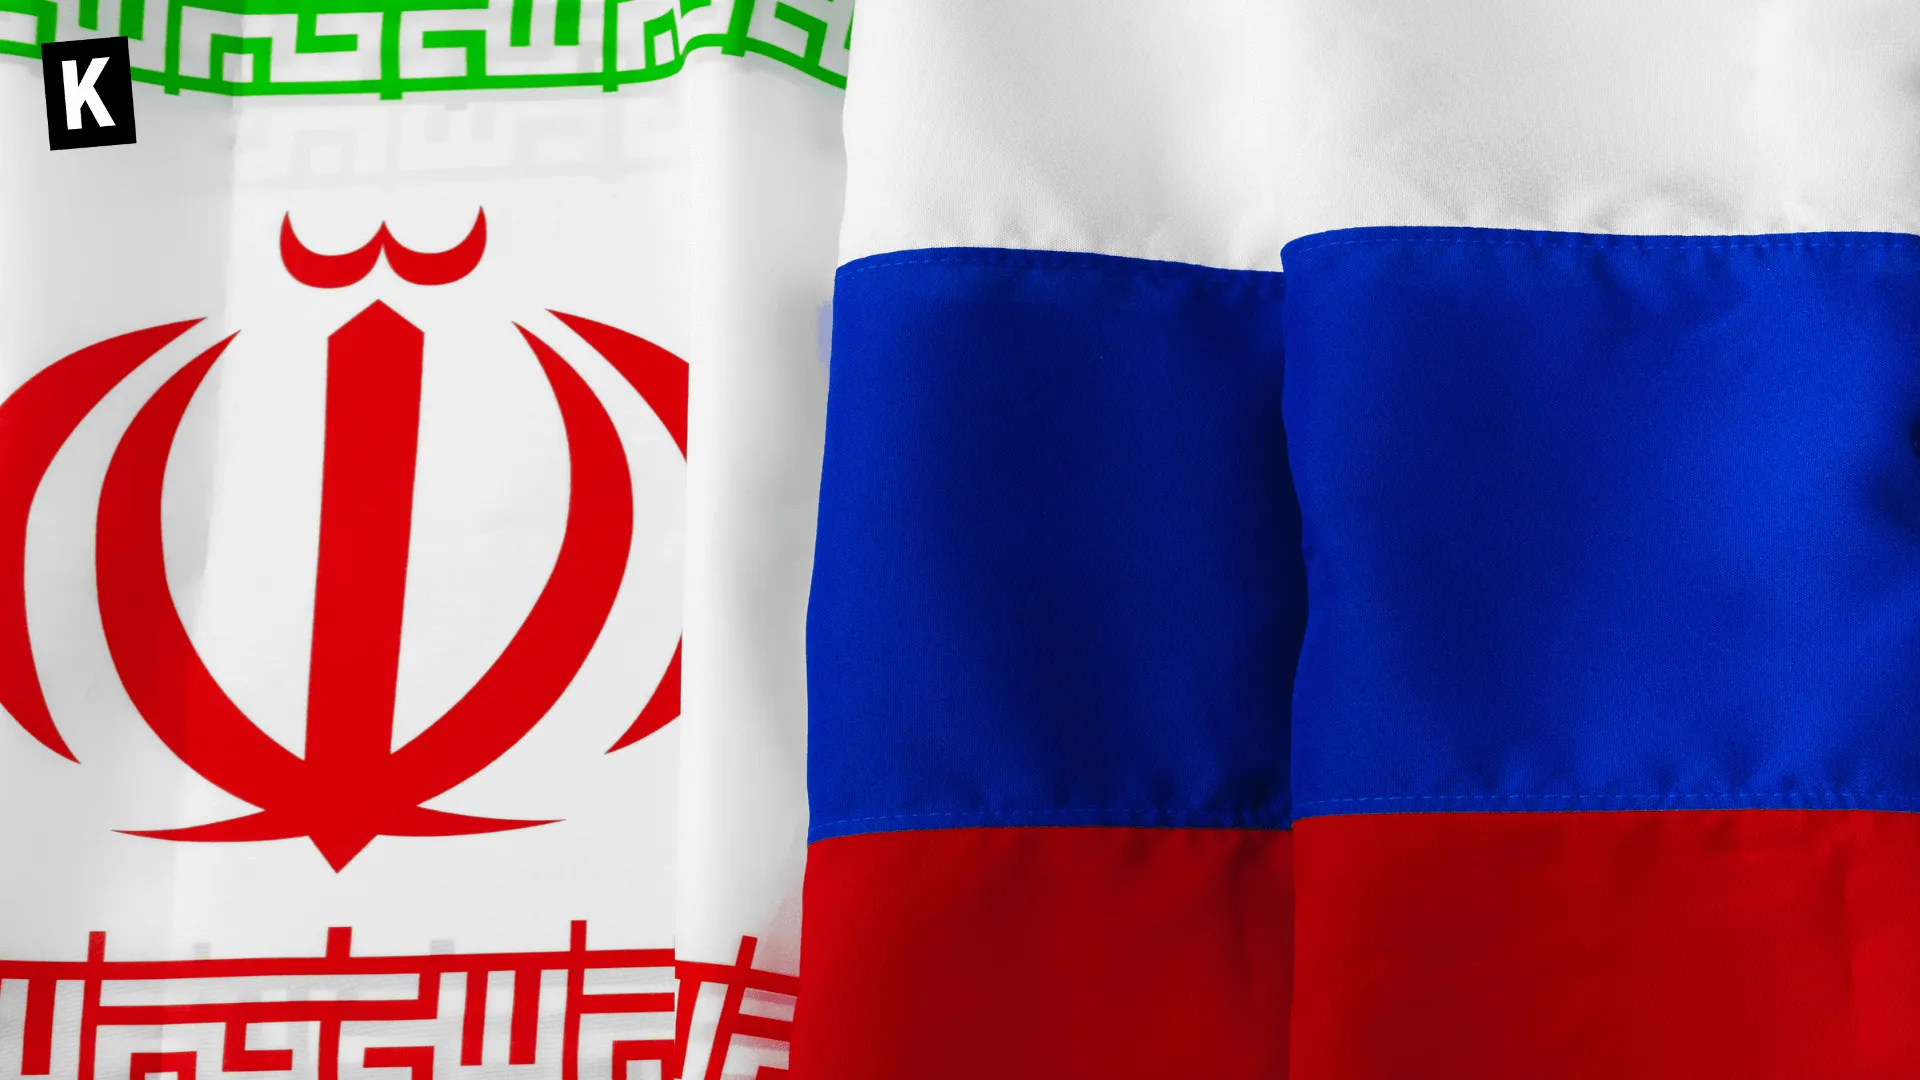 Iranian and Russian flags on fabrics side by side